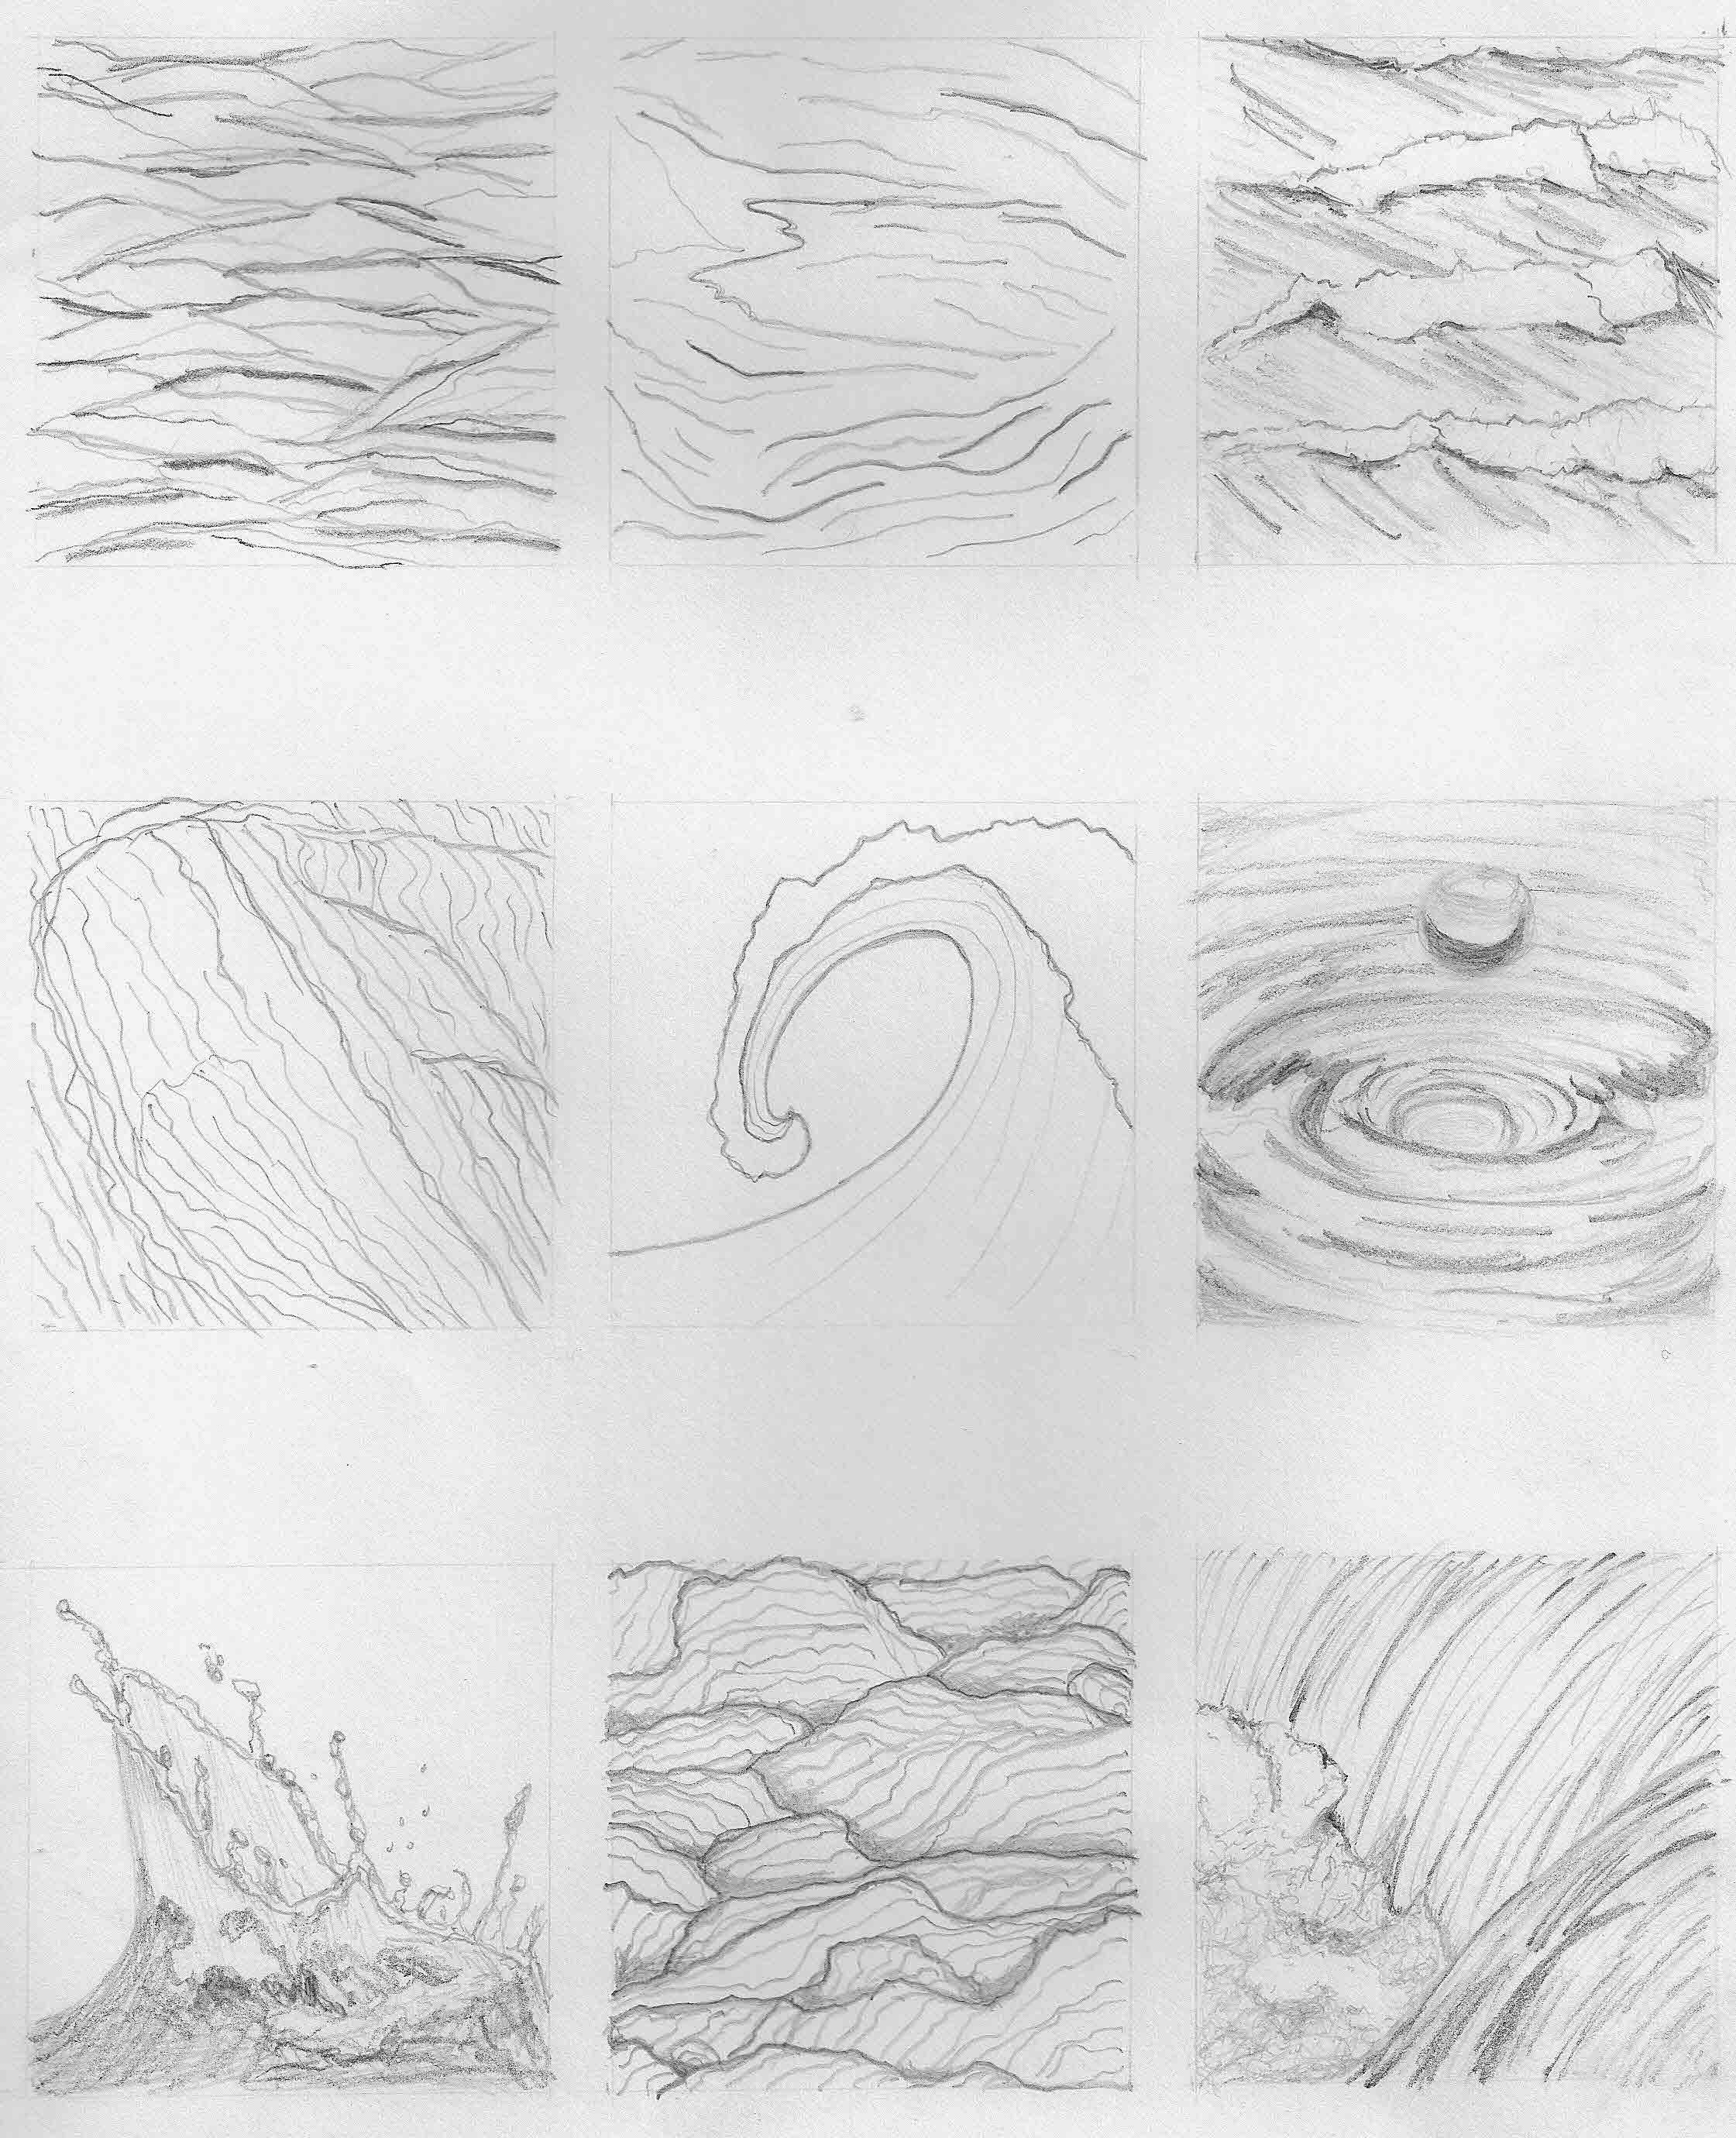 Share more than 159 water sketch